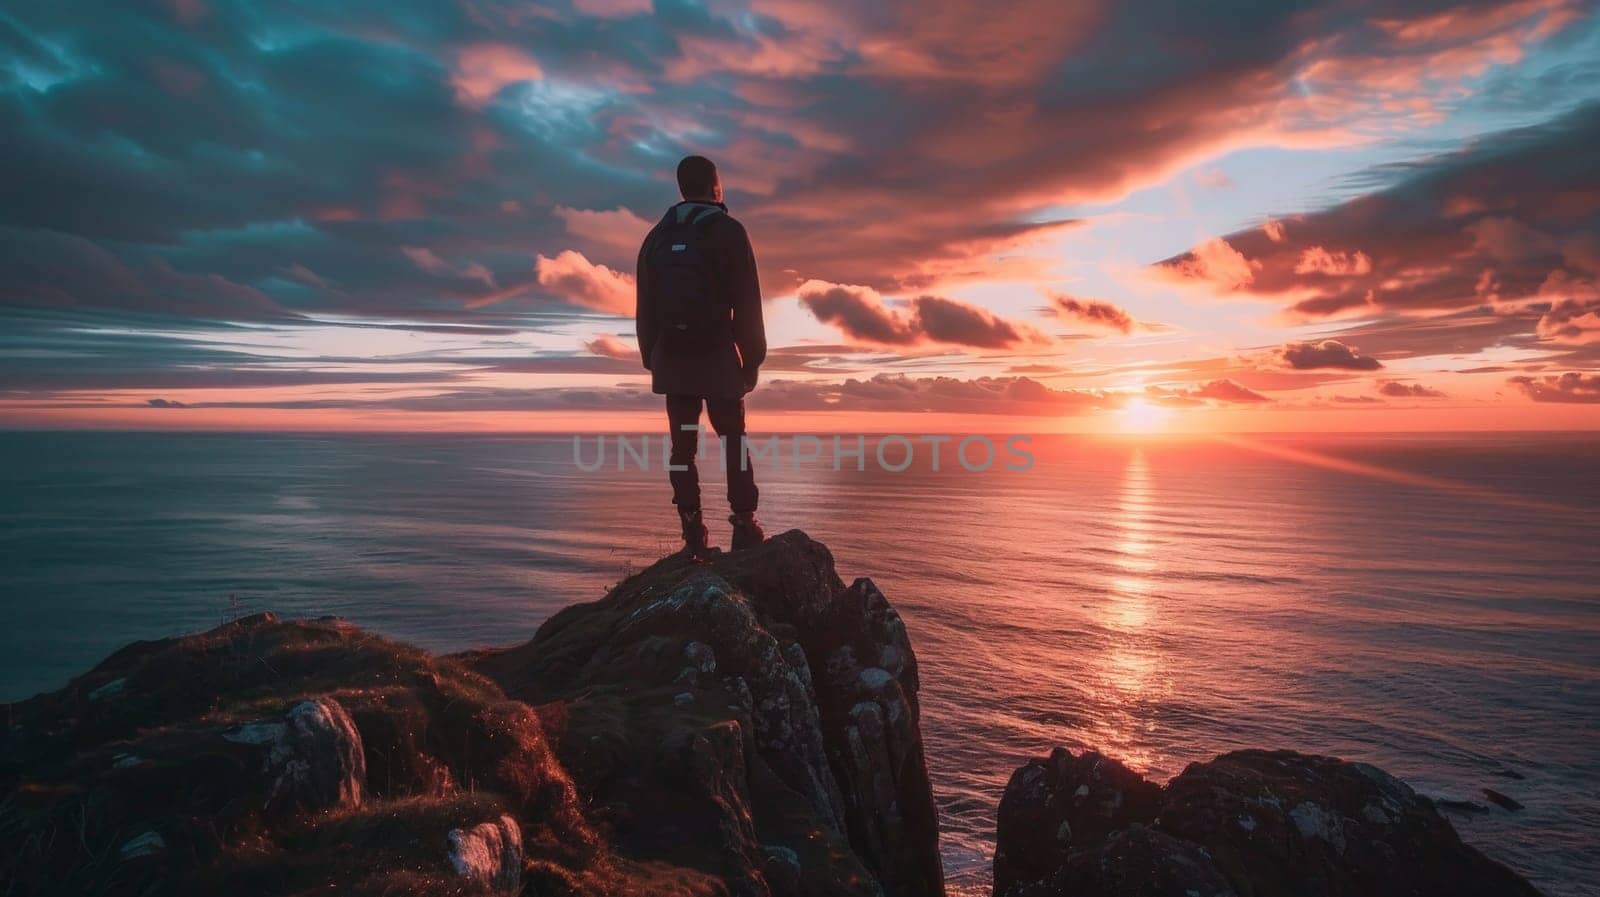 A man stands on a rock overlooking the ocean at sunset by nijieimu